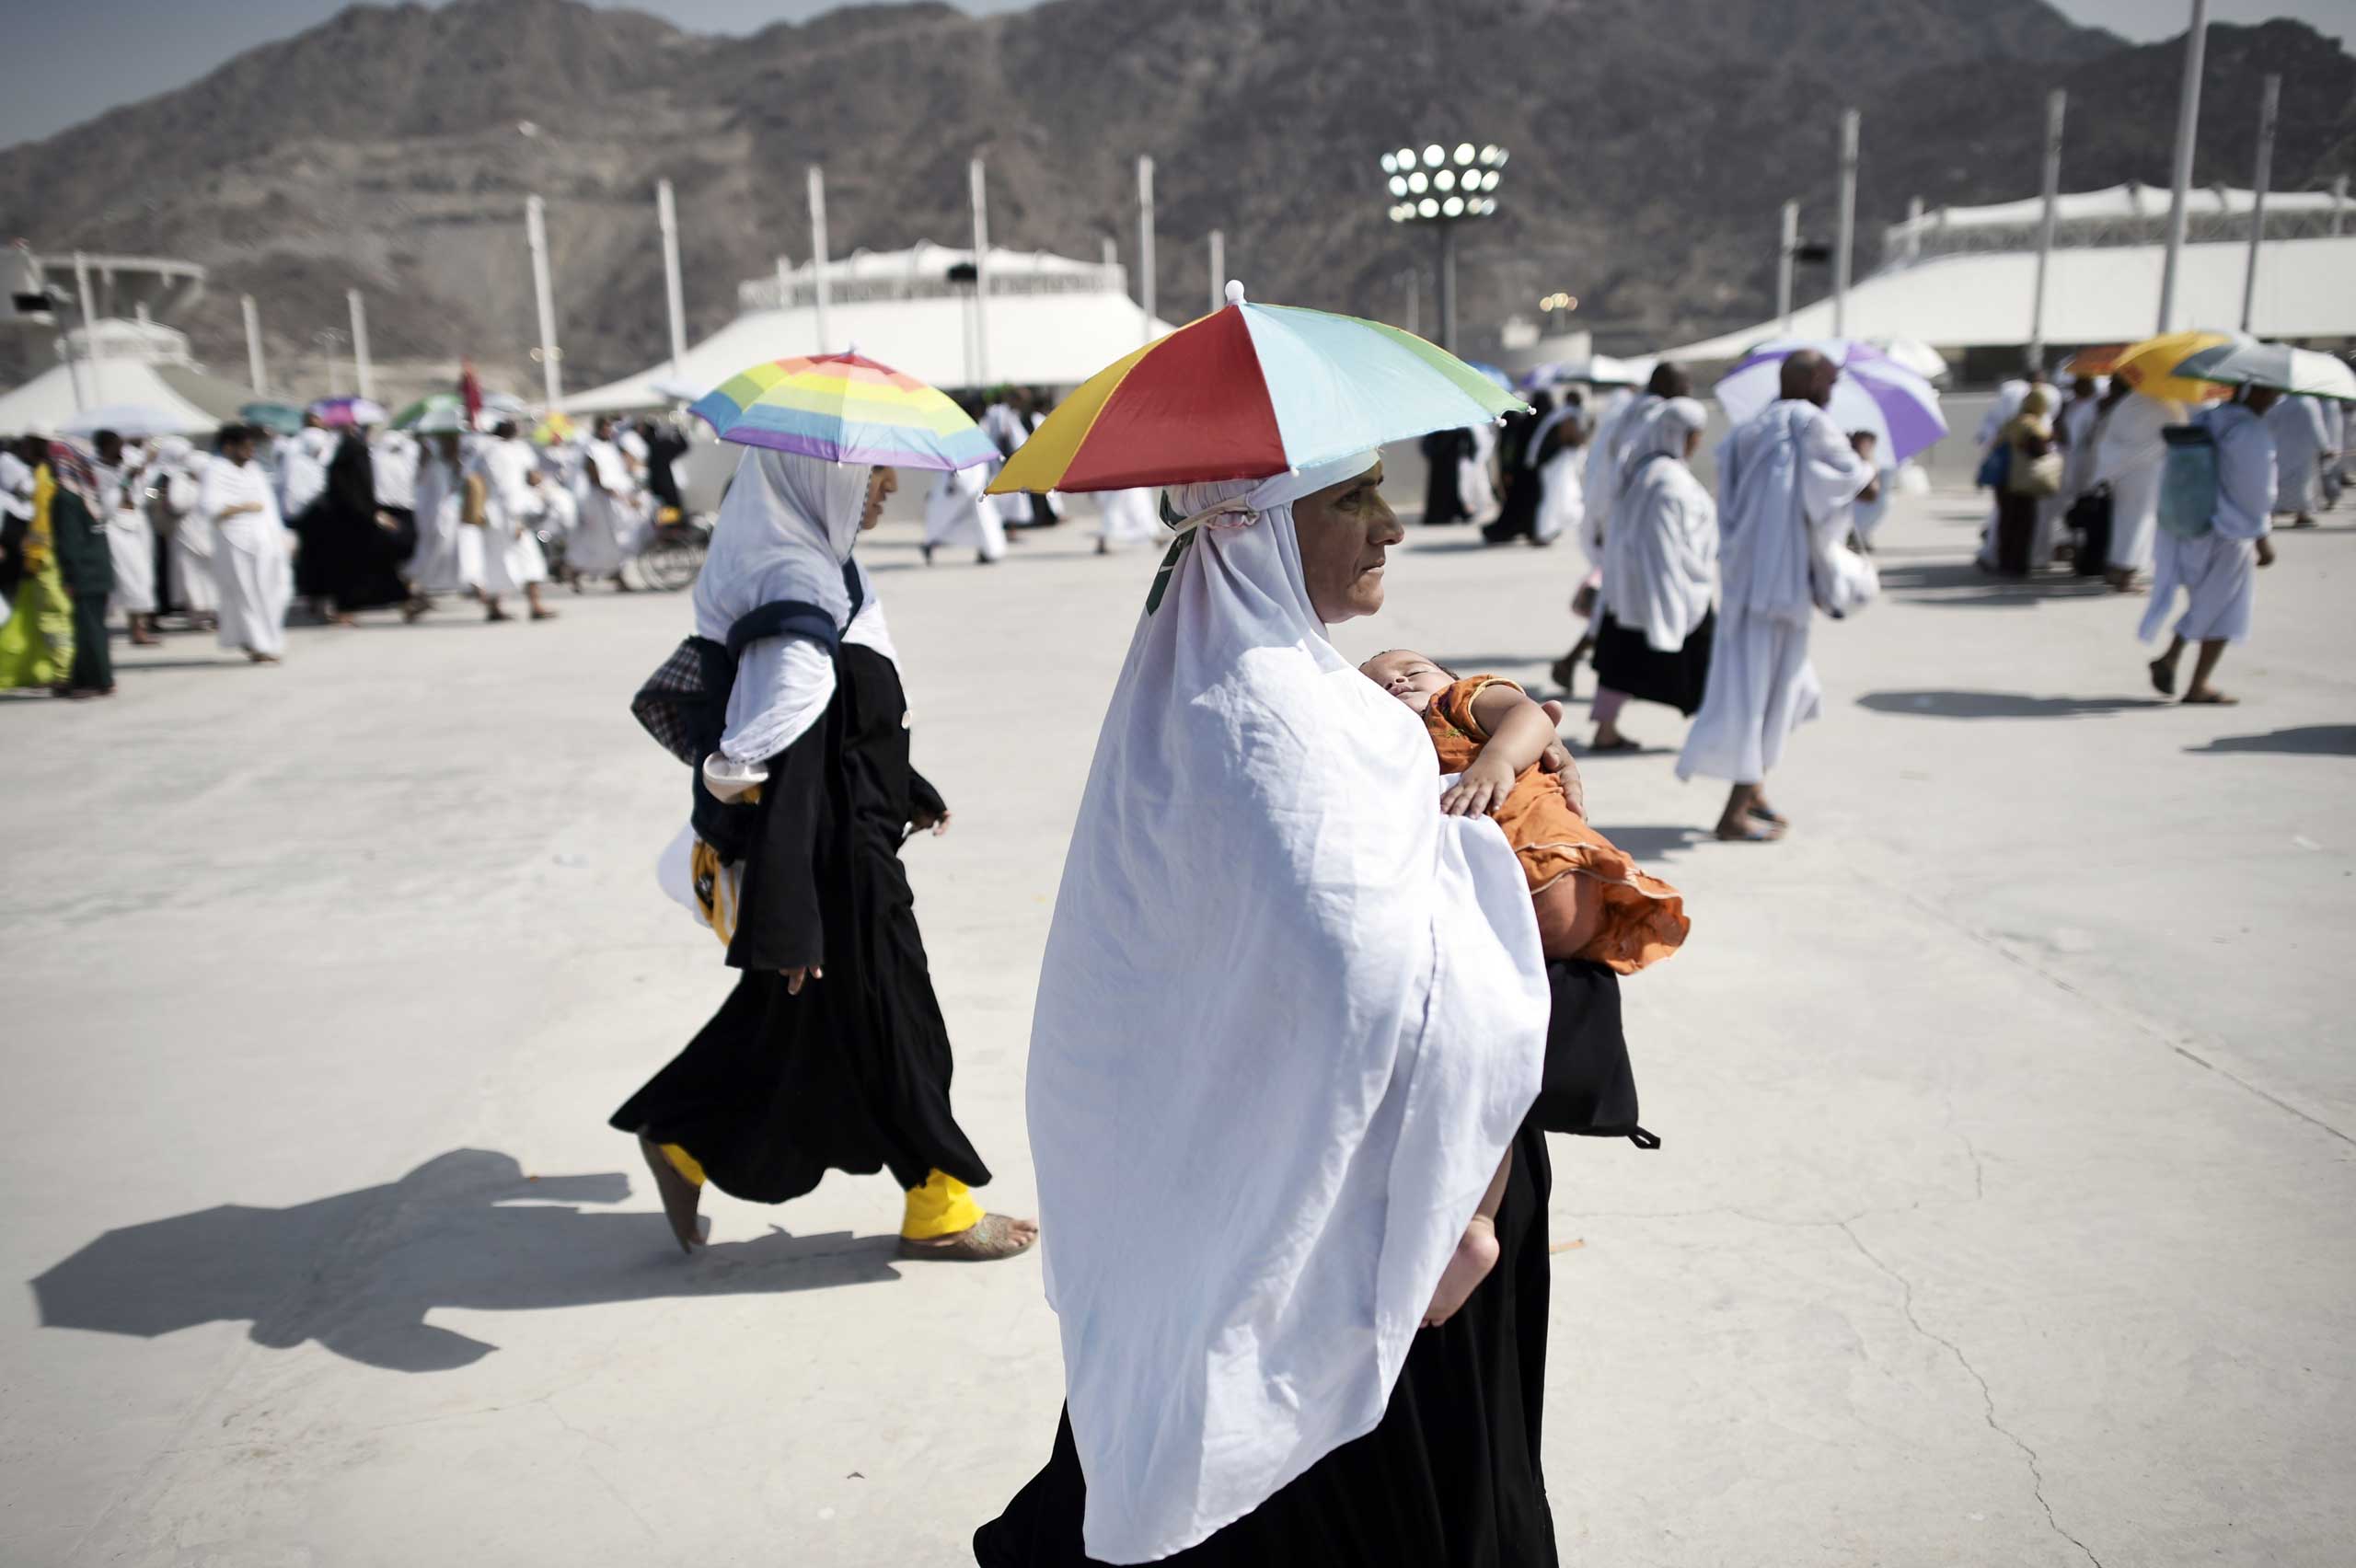 Muslim pilgrims arrive to throw pebbles at pillars during the  Jamarat  ritual, the stoning of Satan, in Mina near the holy city of Mecca, on Sept. 24, 2015.